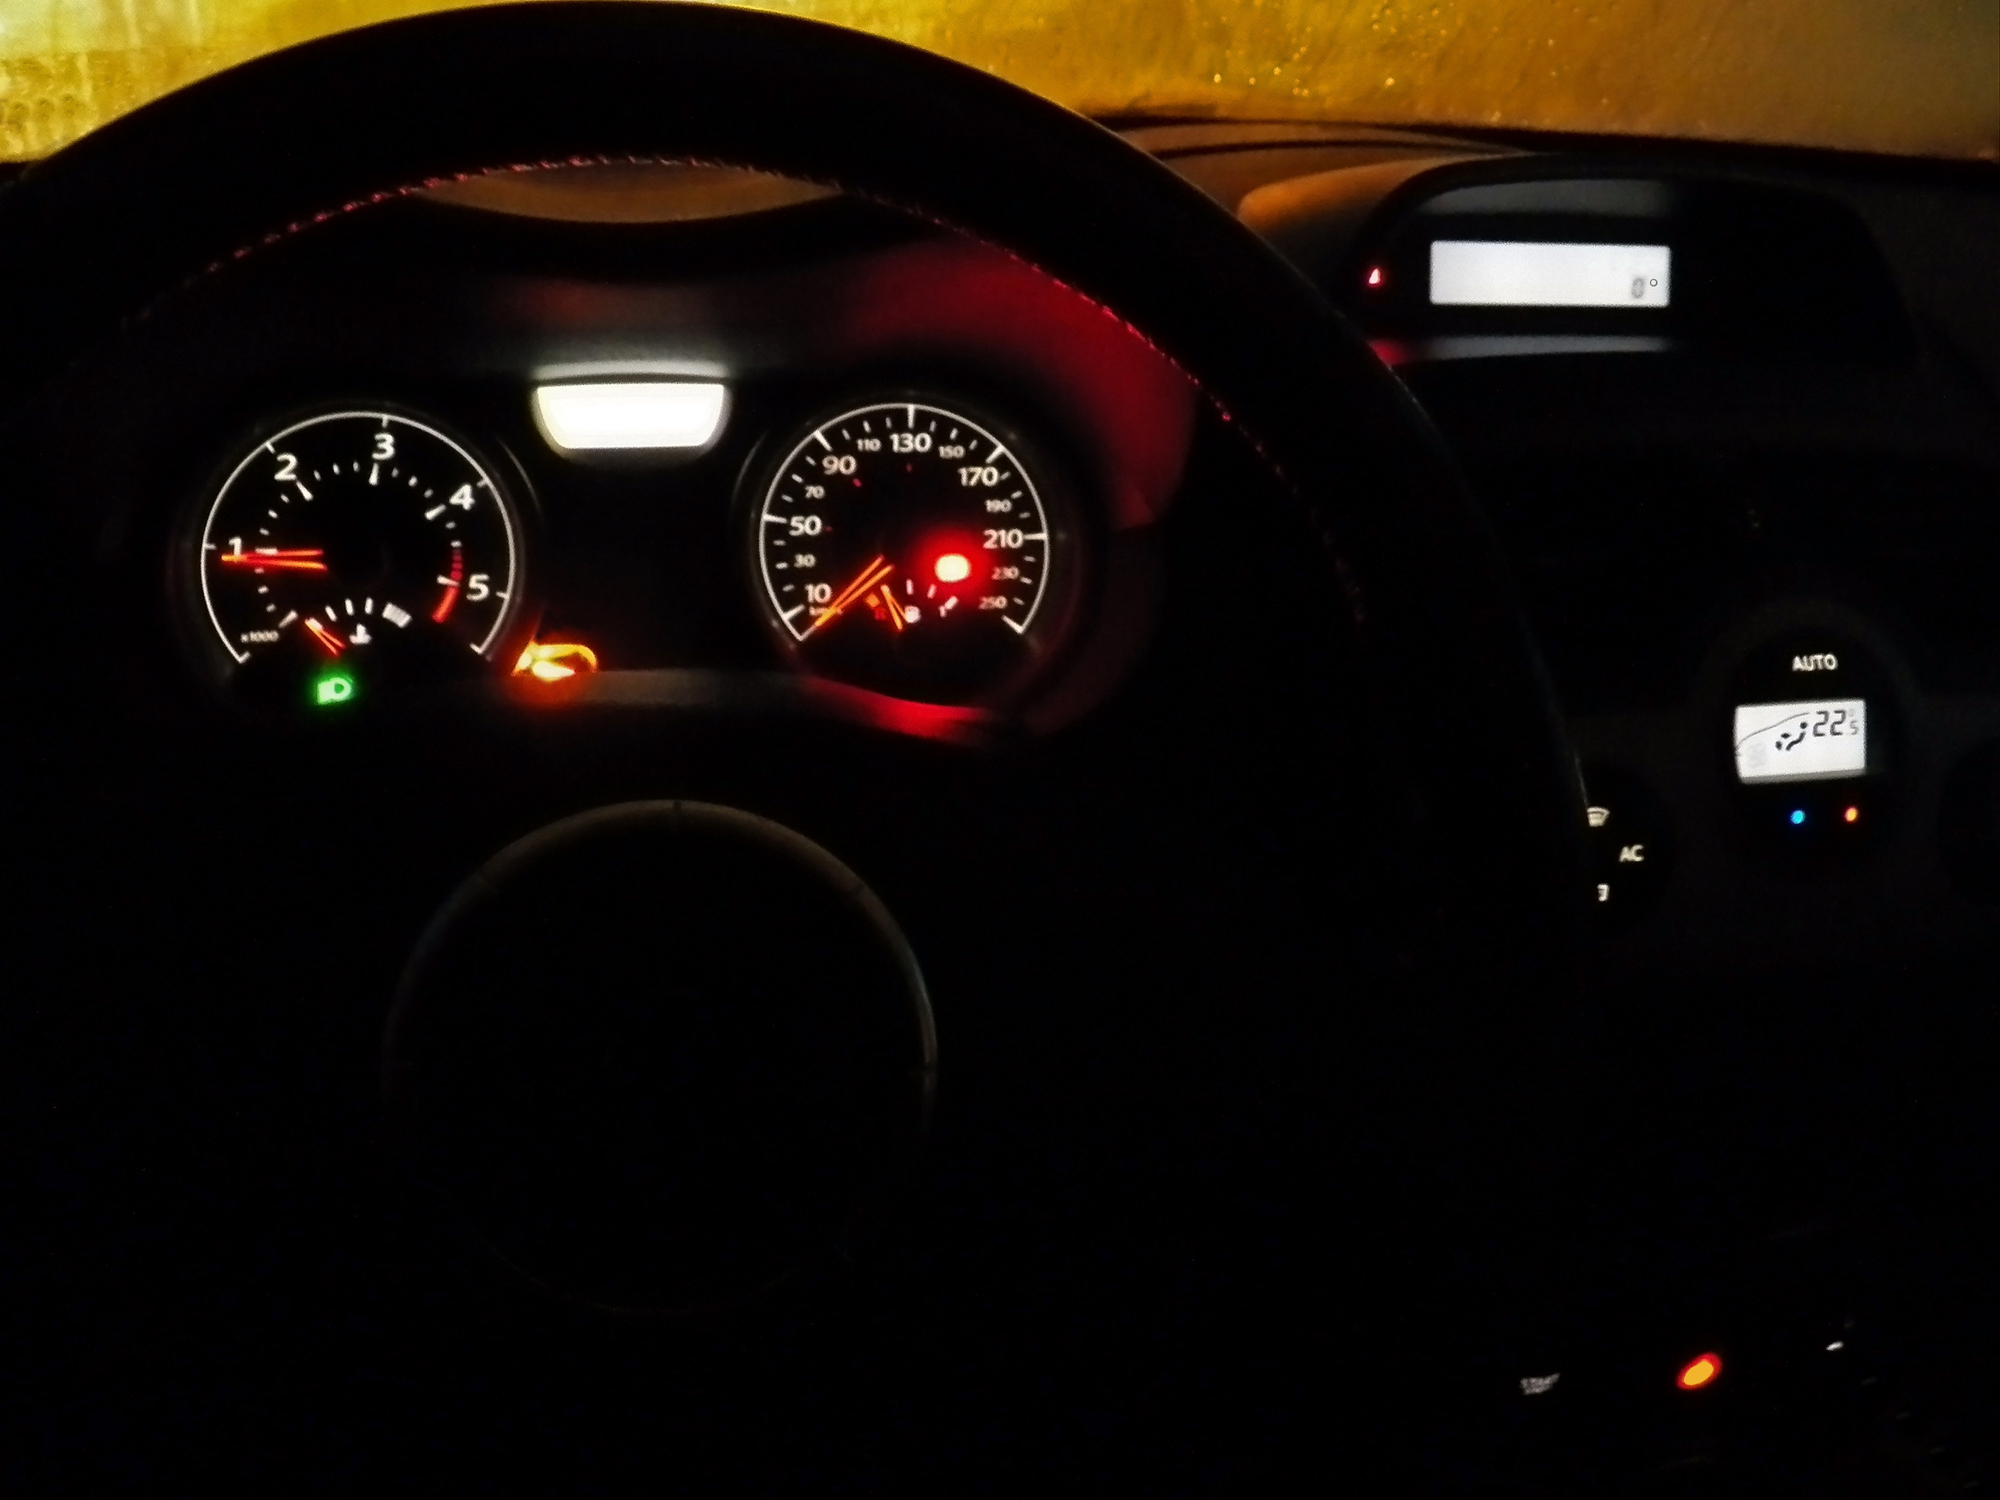 Night illuminated dashboard CLOSE-UP A black interior MOTOR VEHICLE with lighting equipment, red lines, with indicators and some measure equipment -- format 4x3 Close up on the steering wheel. ZERO